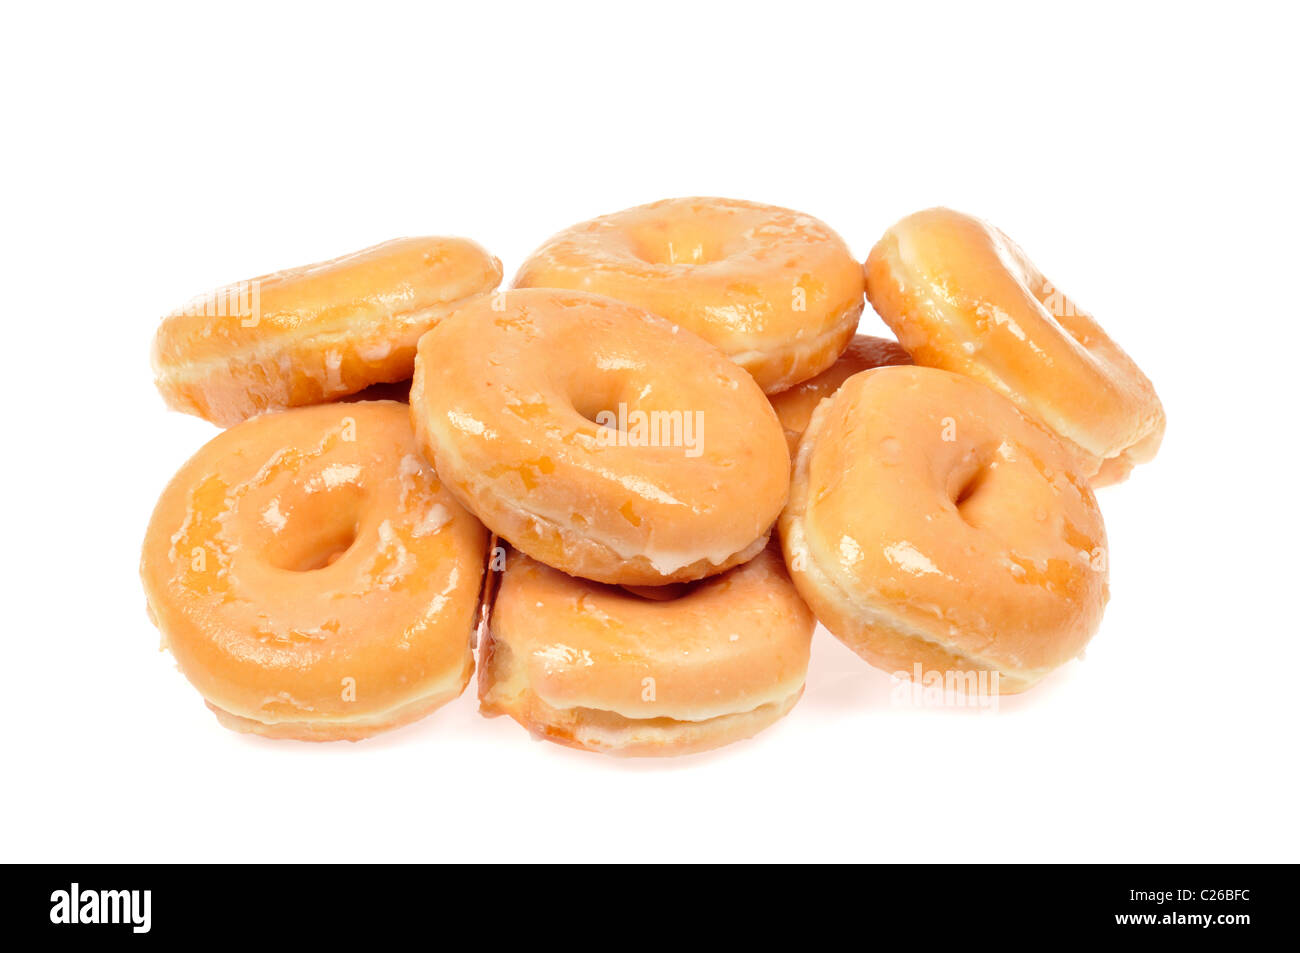 Pile of glazed doughnuts on white background, cut out. Stock Photo